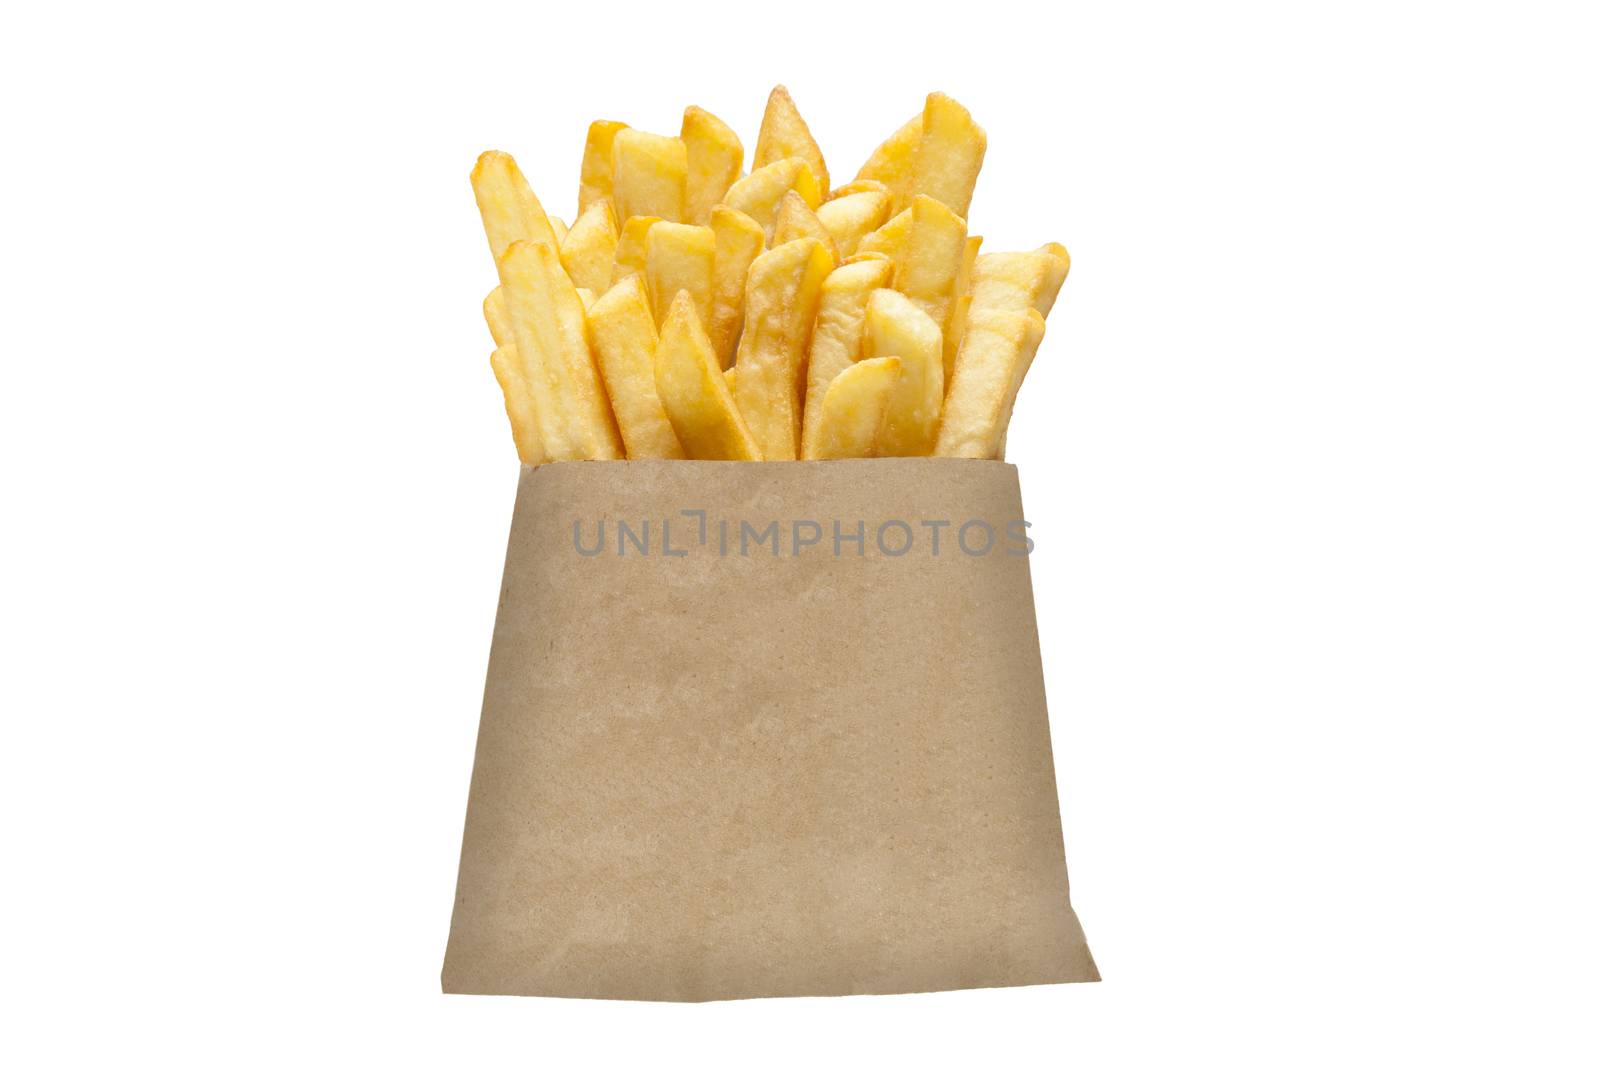 French fries in paper packaging by haiderazim